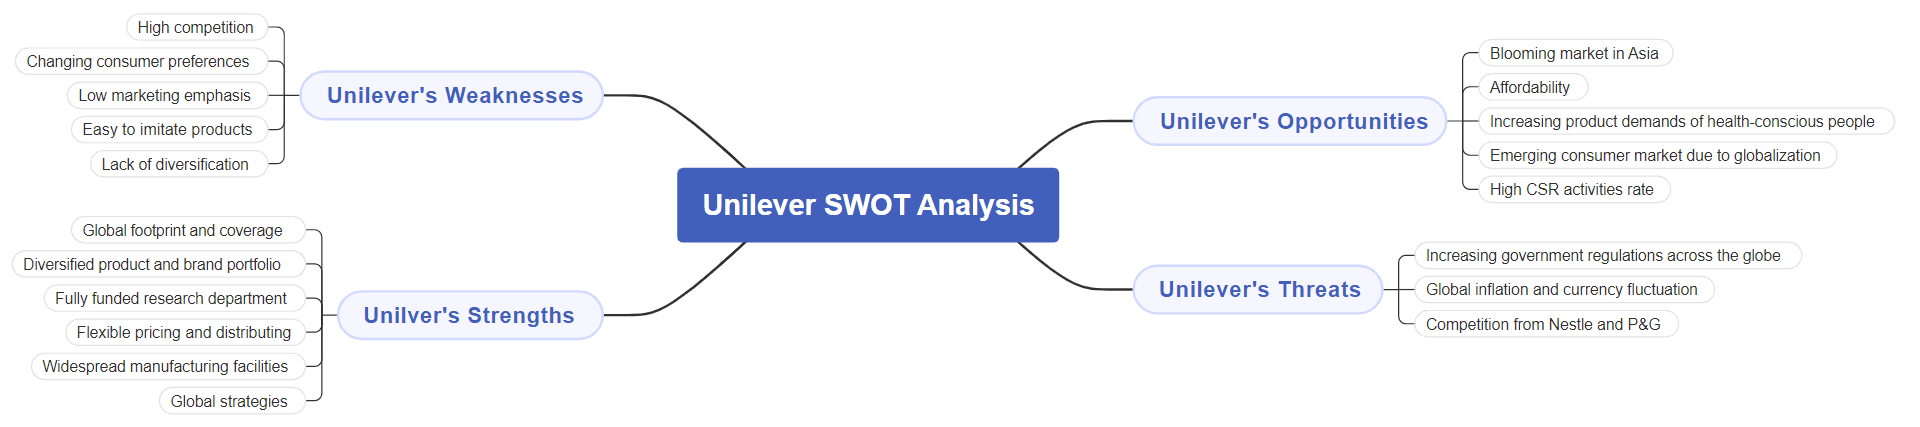 Unilever SWOT Analysis mind map.png